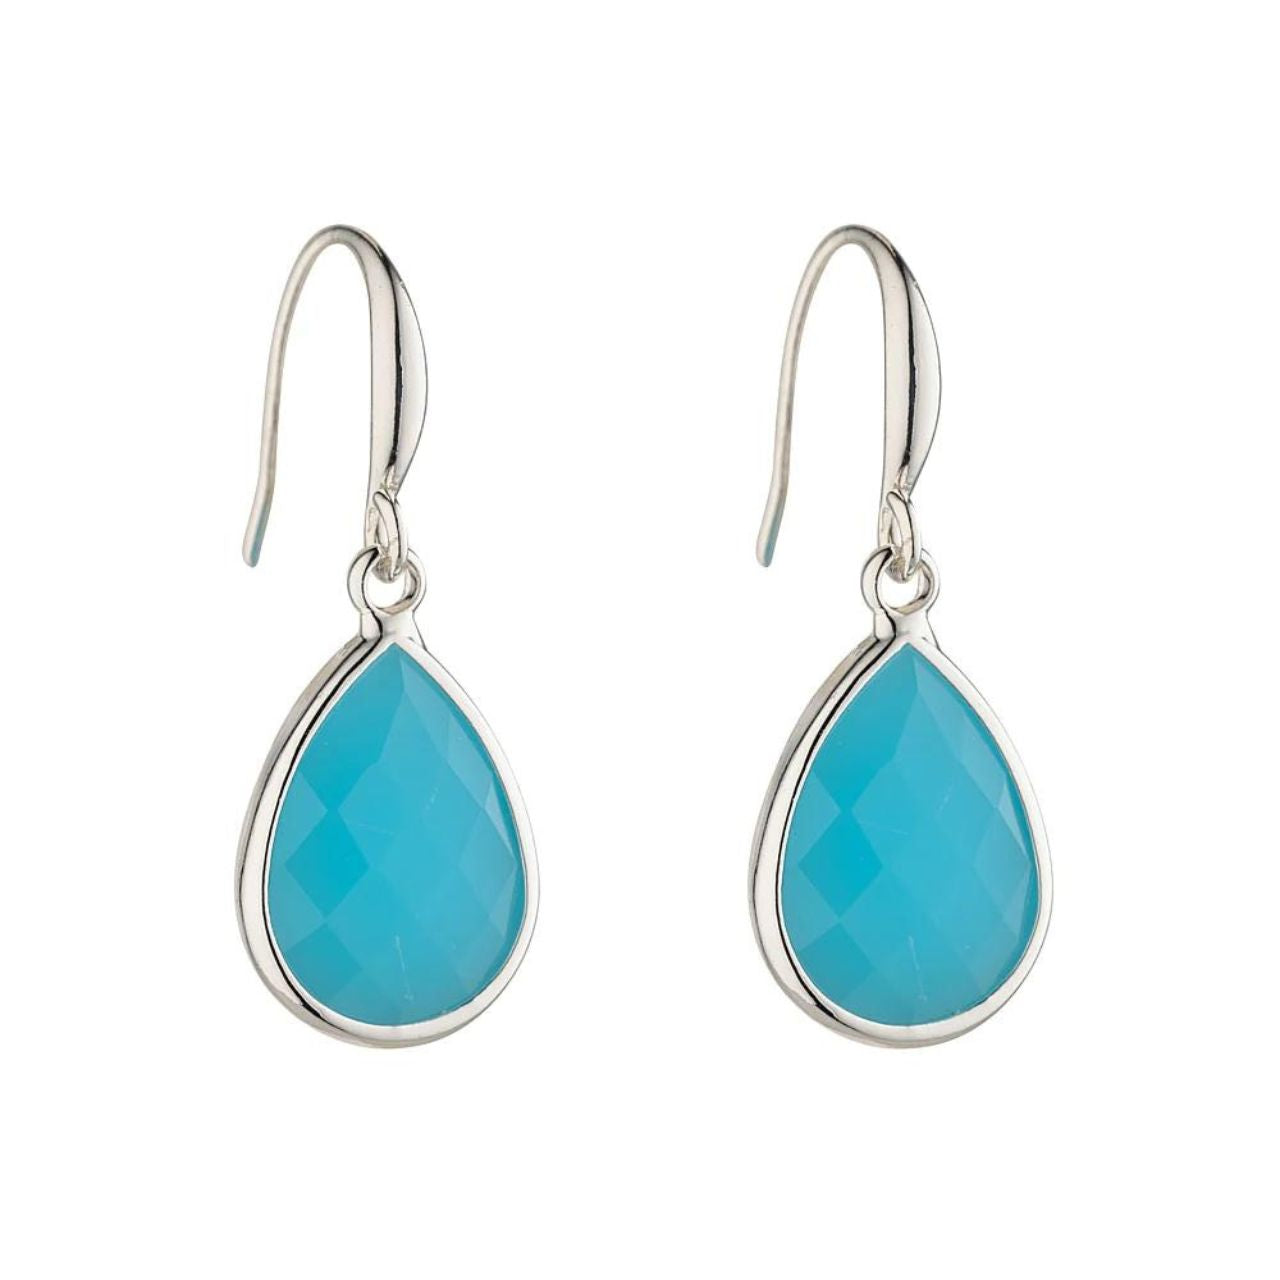 Silver Plated Sophia Drop Earrings With Blue Stone by Knight & Day  These silver plated Sophia Drop Earrings feature a striking blue stone and are crafted by the renowned Knight & Day brand.